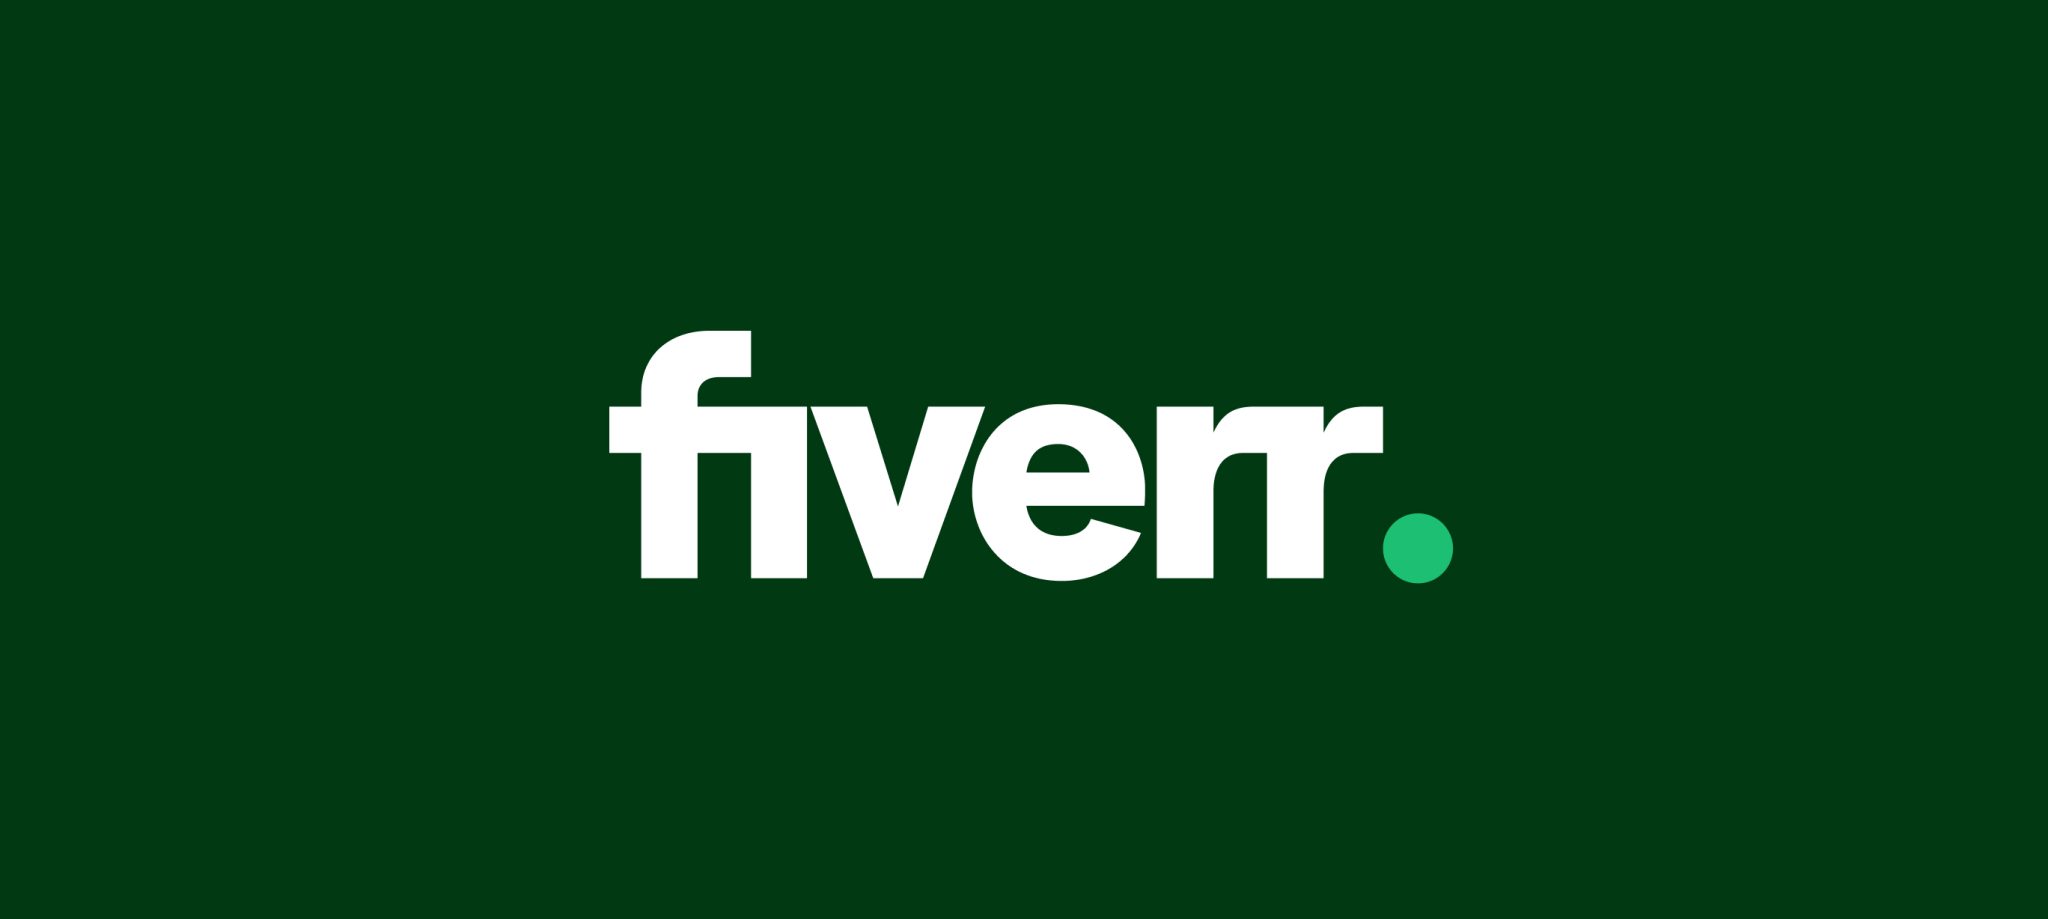 How To be a successful Fiverr Freelancer? Nicholas Idoko